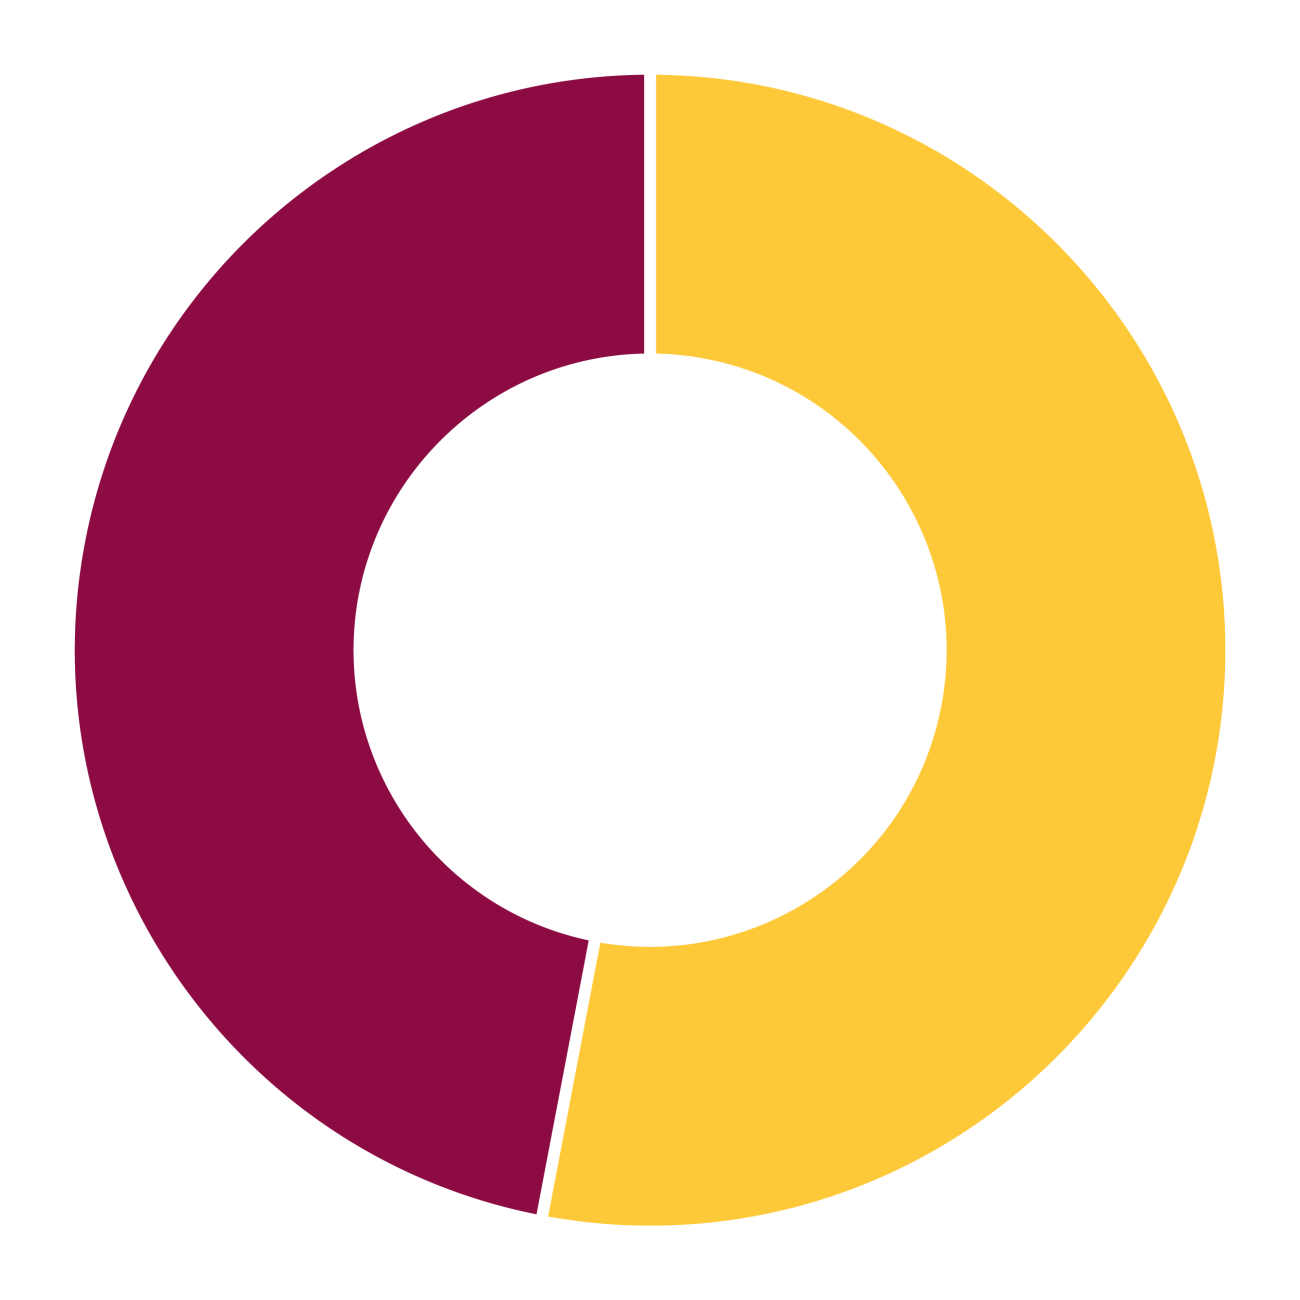 Maroon and gold pie chart showing 47%.